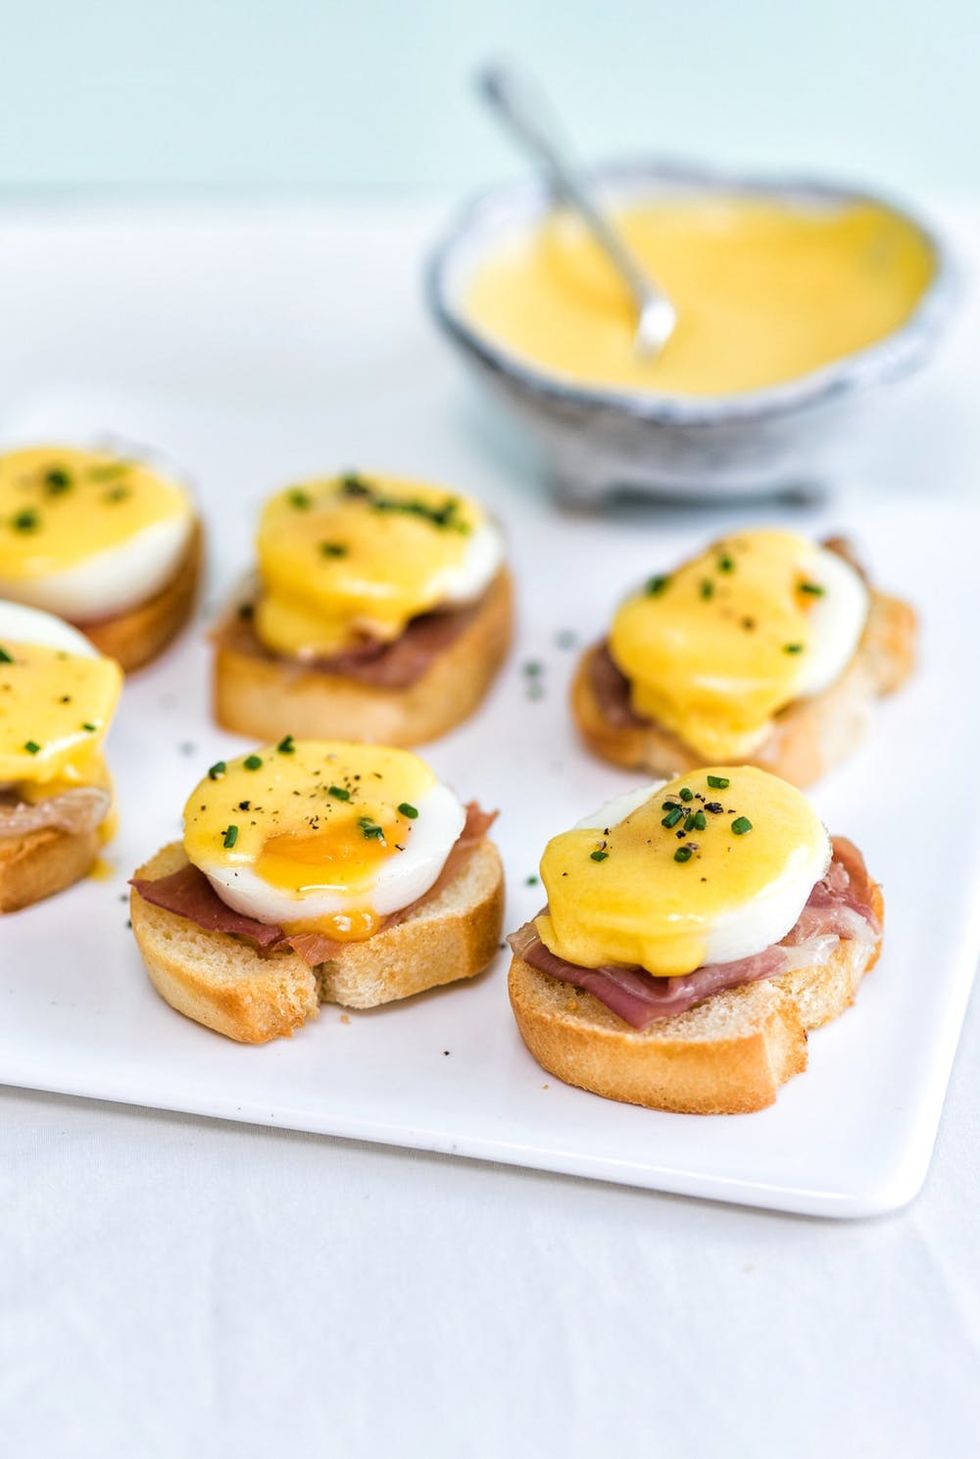 Why is with bite-sized food? Little nibbles, mini mouthfuls or amuse bouche - call them what you like, they taste twice as nice when shrunk down to adorable proportions. Make these super-cute mini Eggs Benedict to wow at your next party! 